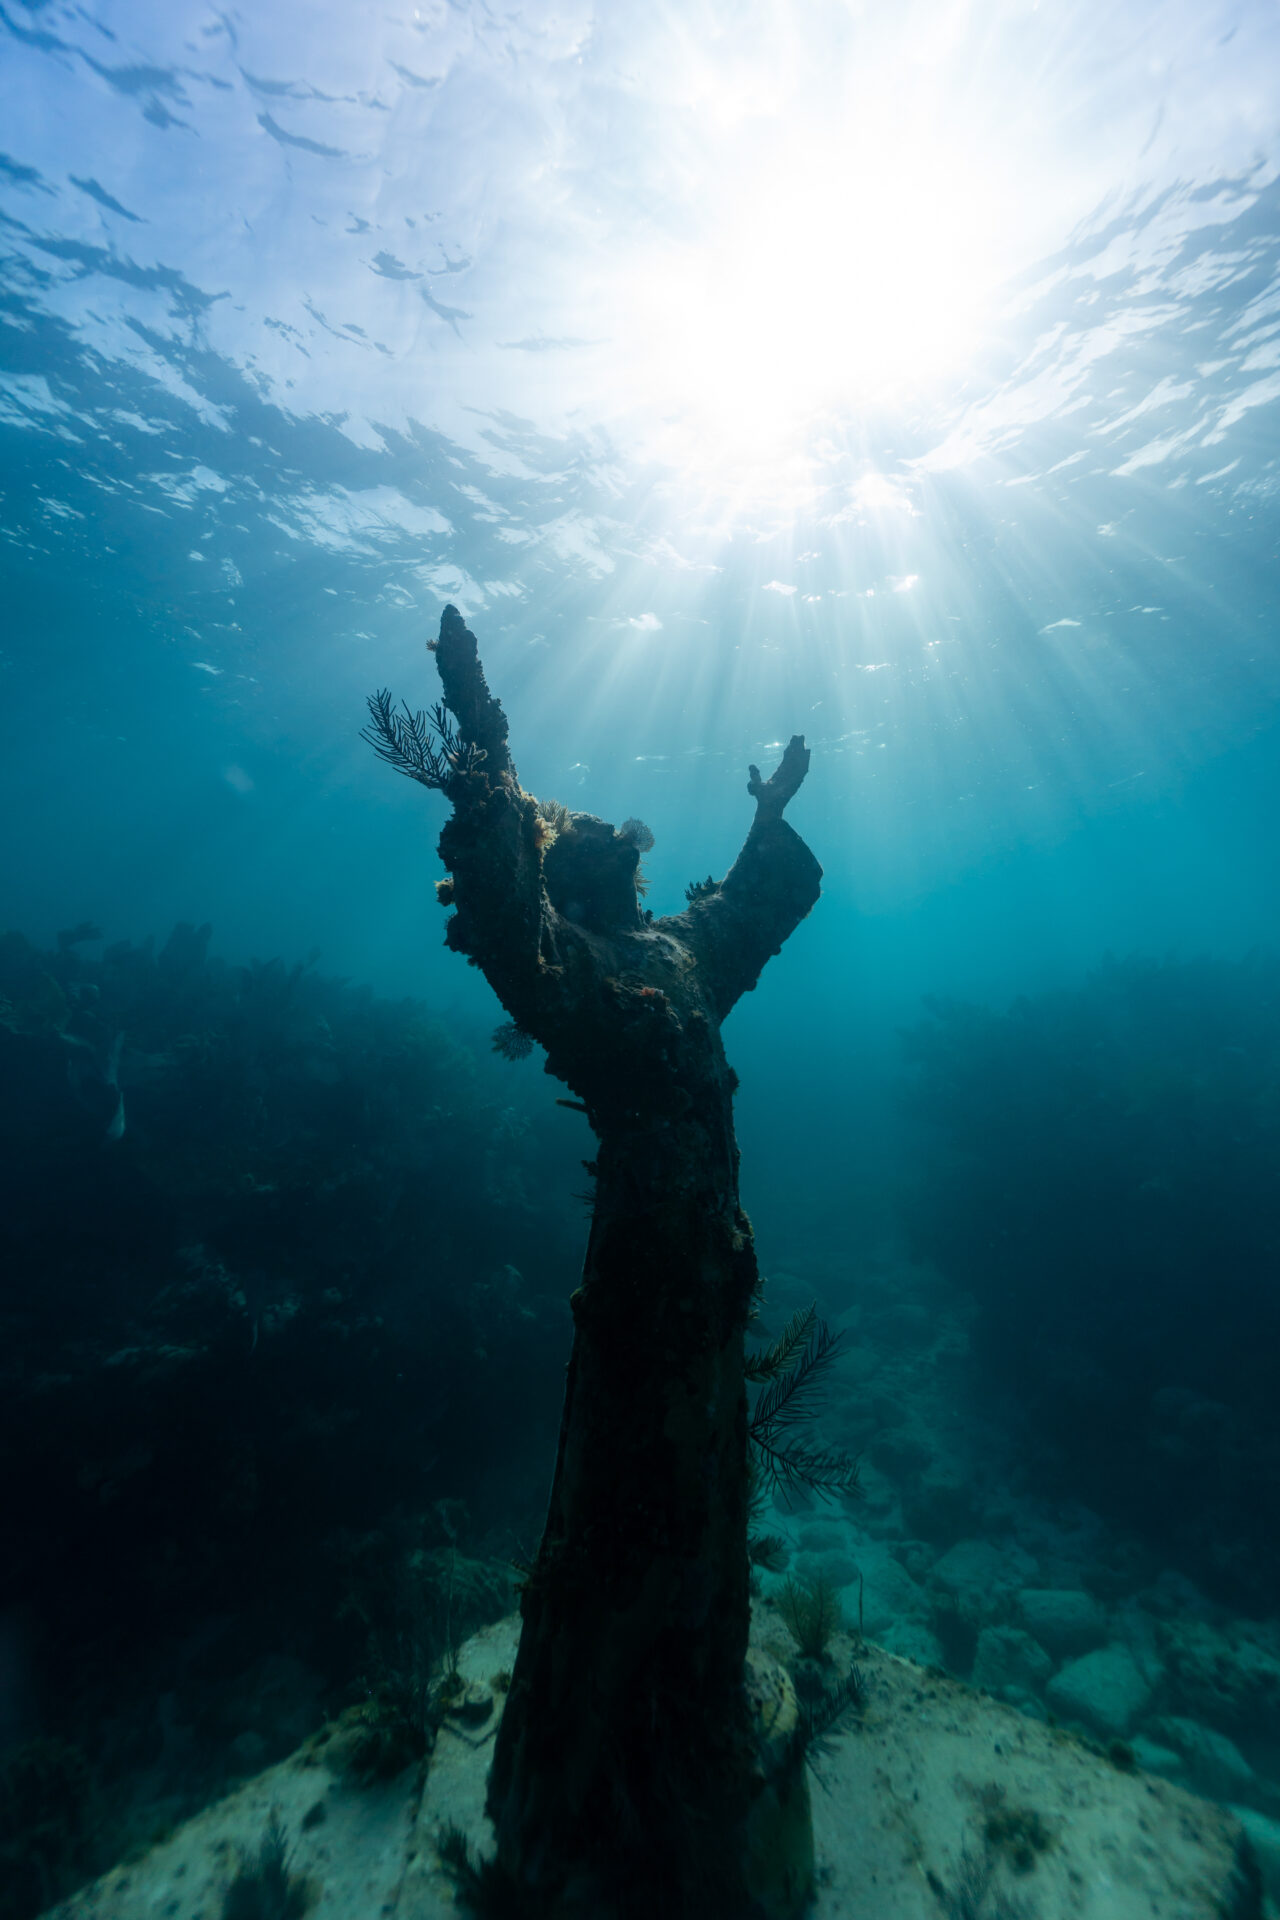 Christ of the Abyss statue in John Pennekamp State Park in the Florida Keys. A Great Photography location!